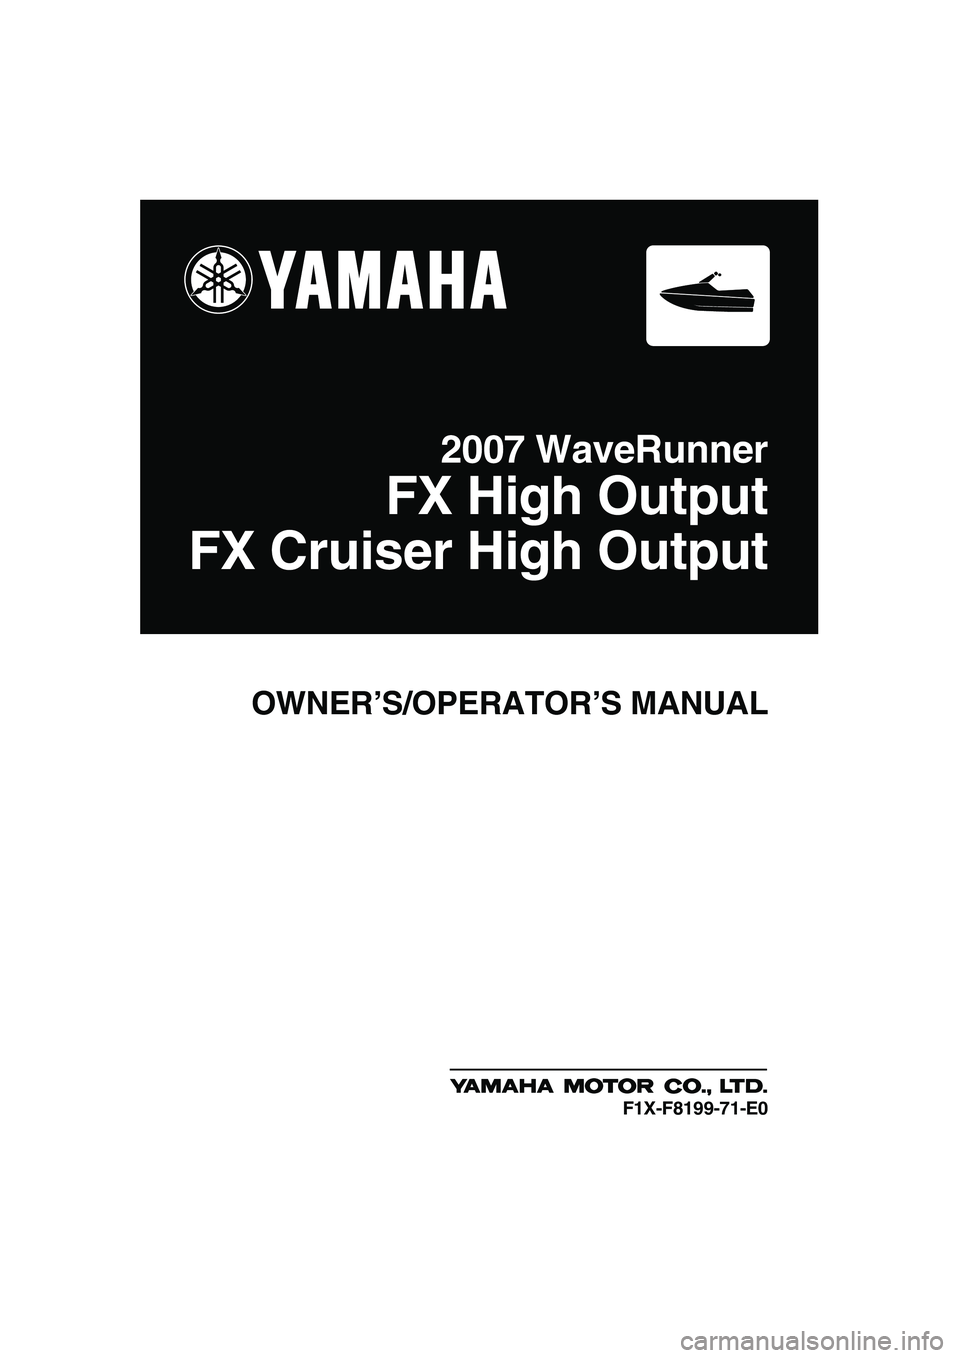 YAMAHA FX HO CRUISER 2007  Owners Manual OWNER’S/OPERATOR’S MANUAL
2007 WaveRunner
FX High Output
FX Cruiser High Output
F1X-F8199-71-E0
UF1X71E0.book  Page 1  Tuesday, September 26, 2006  9:52 AM 